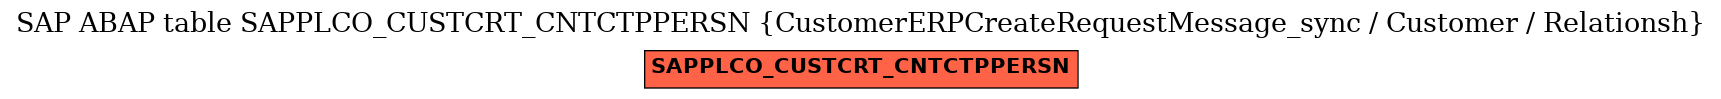 E-R Diagram for table SAPPLCO_CUSTCRT_CNTCTPPERSN (CustomerERPCreateRequestMessage_sync / Customer / Relationsh)